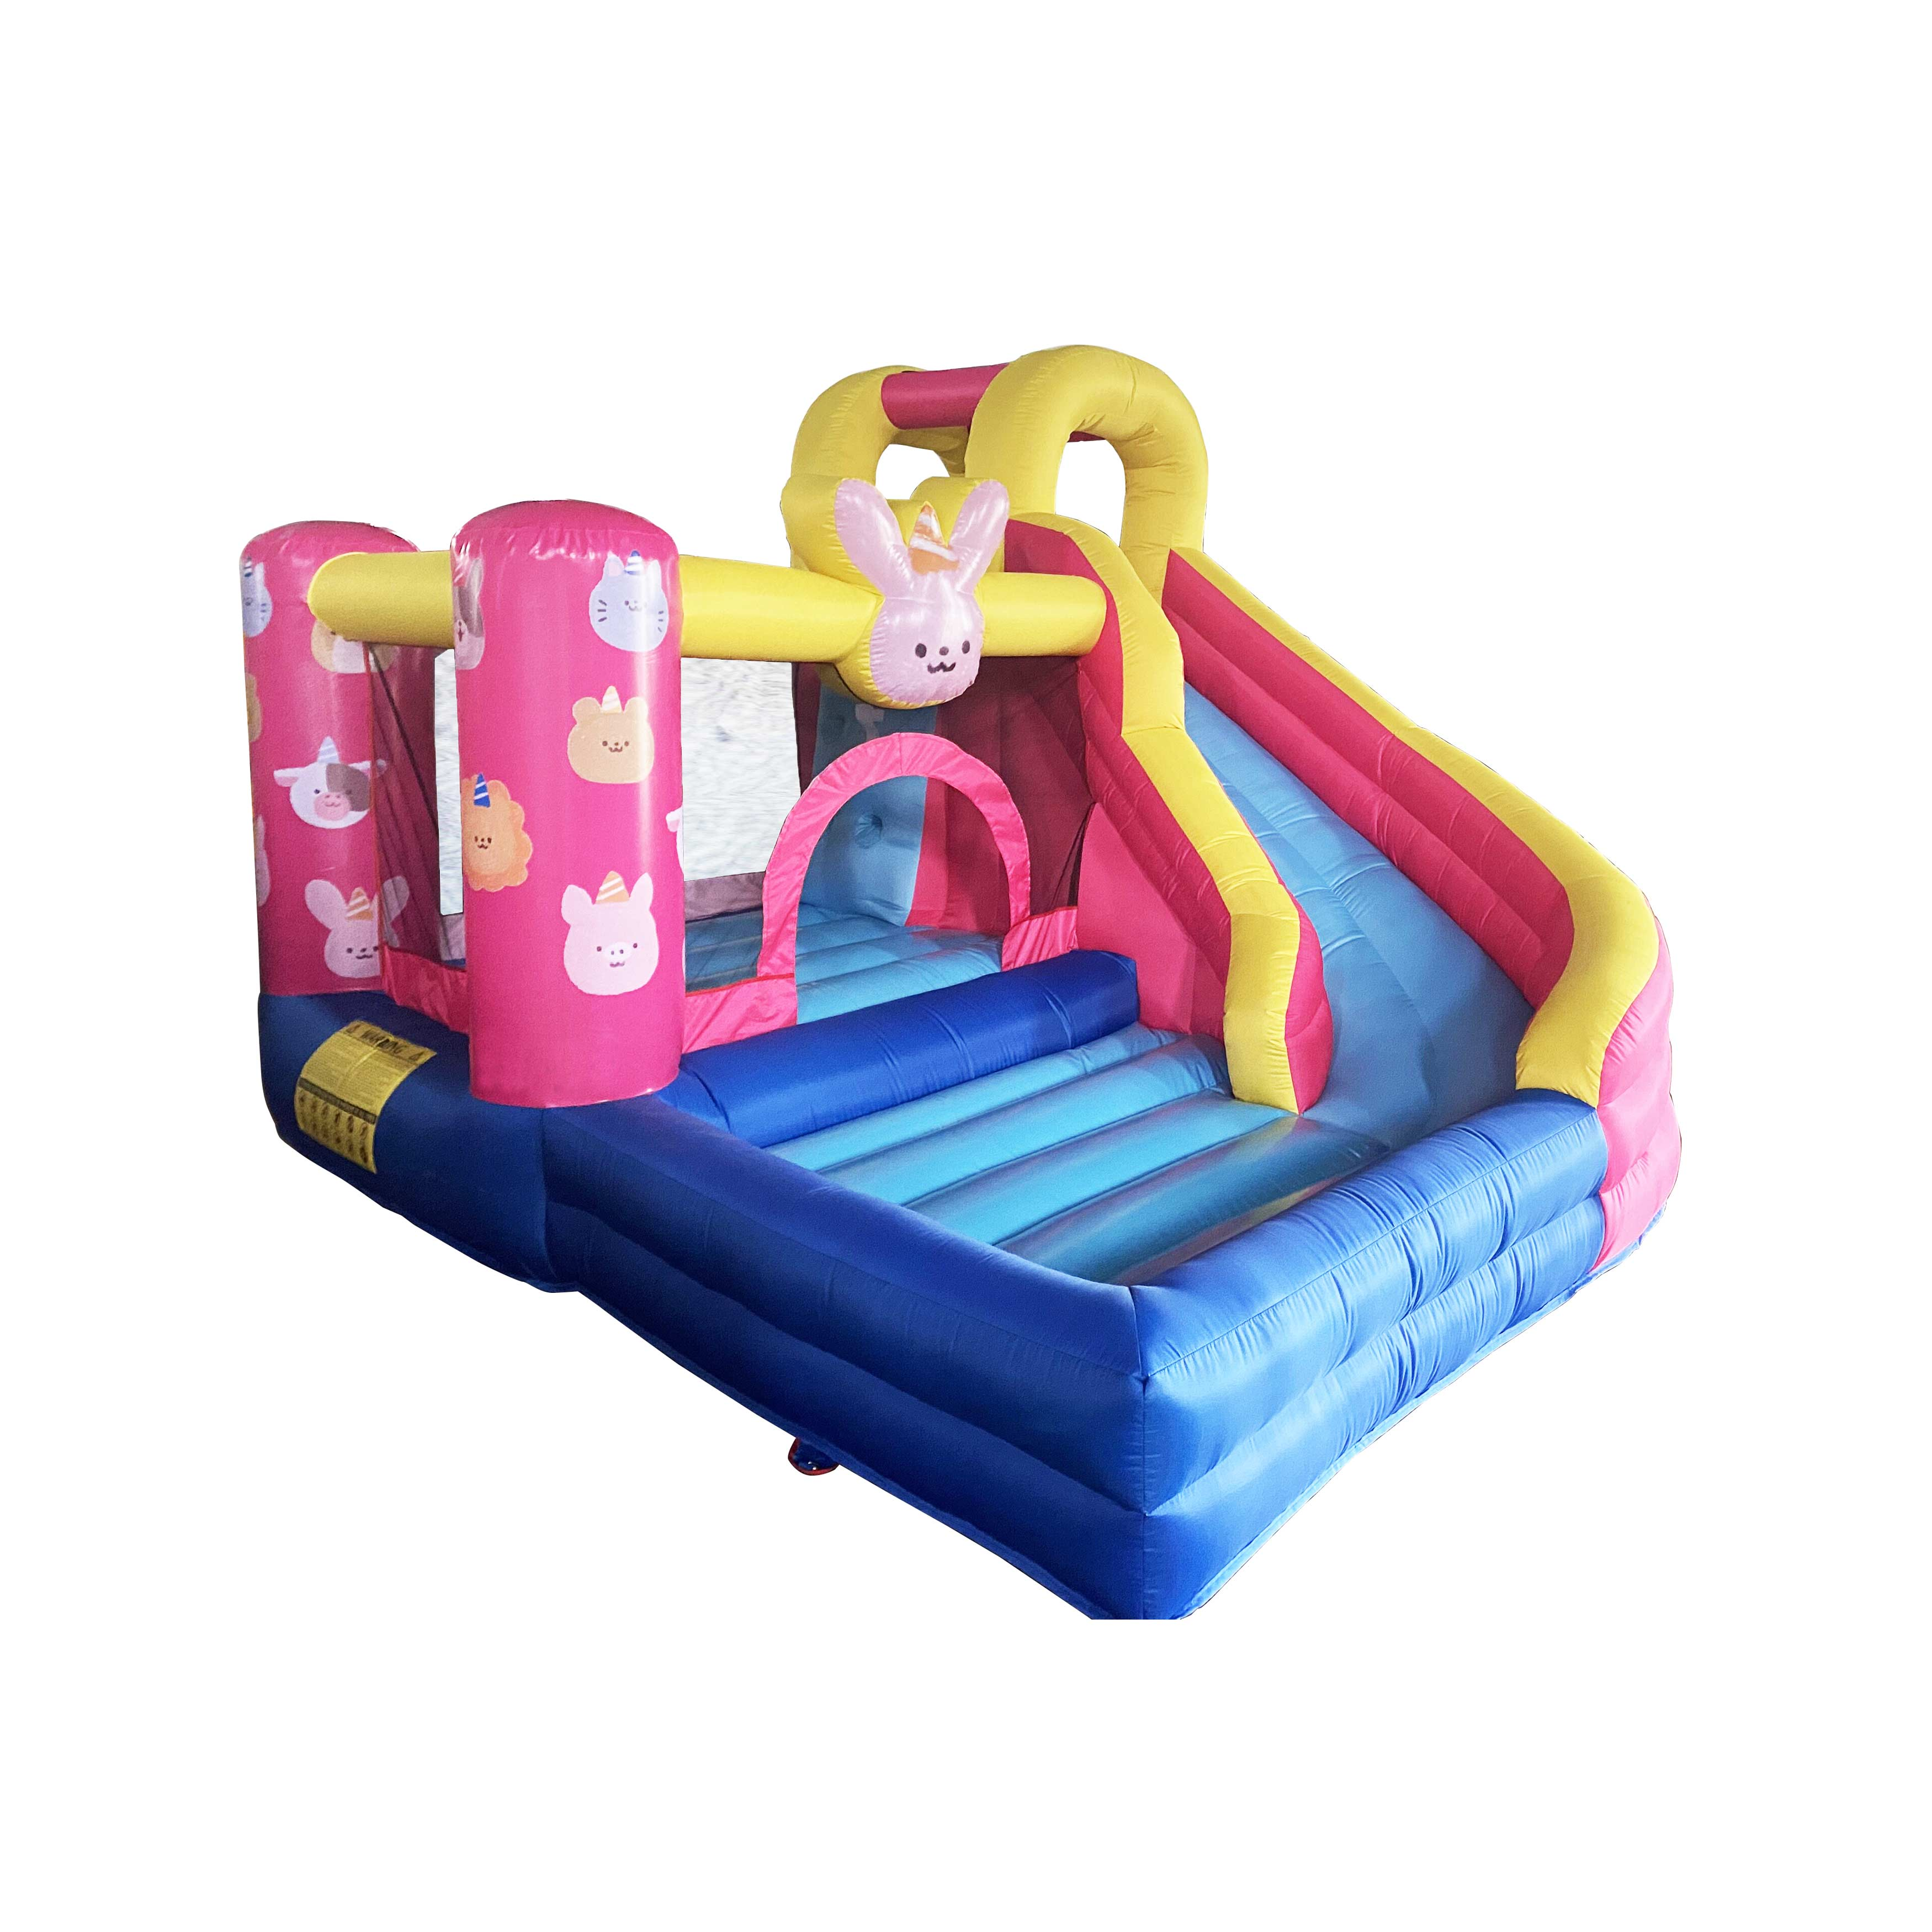 Animal design inflatable combo slide bouncy castle kids outdoor inflatable toys